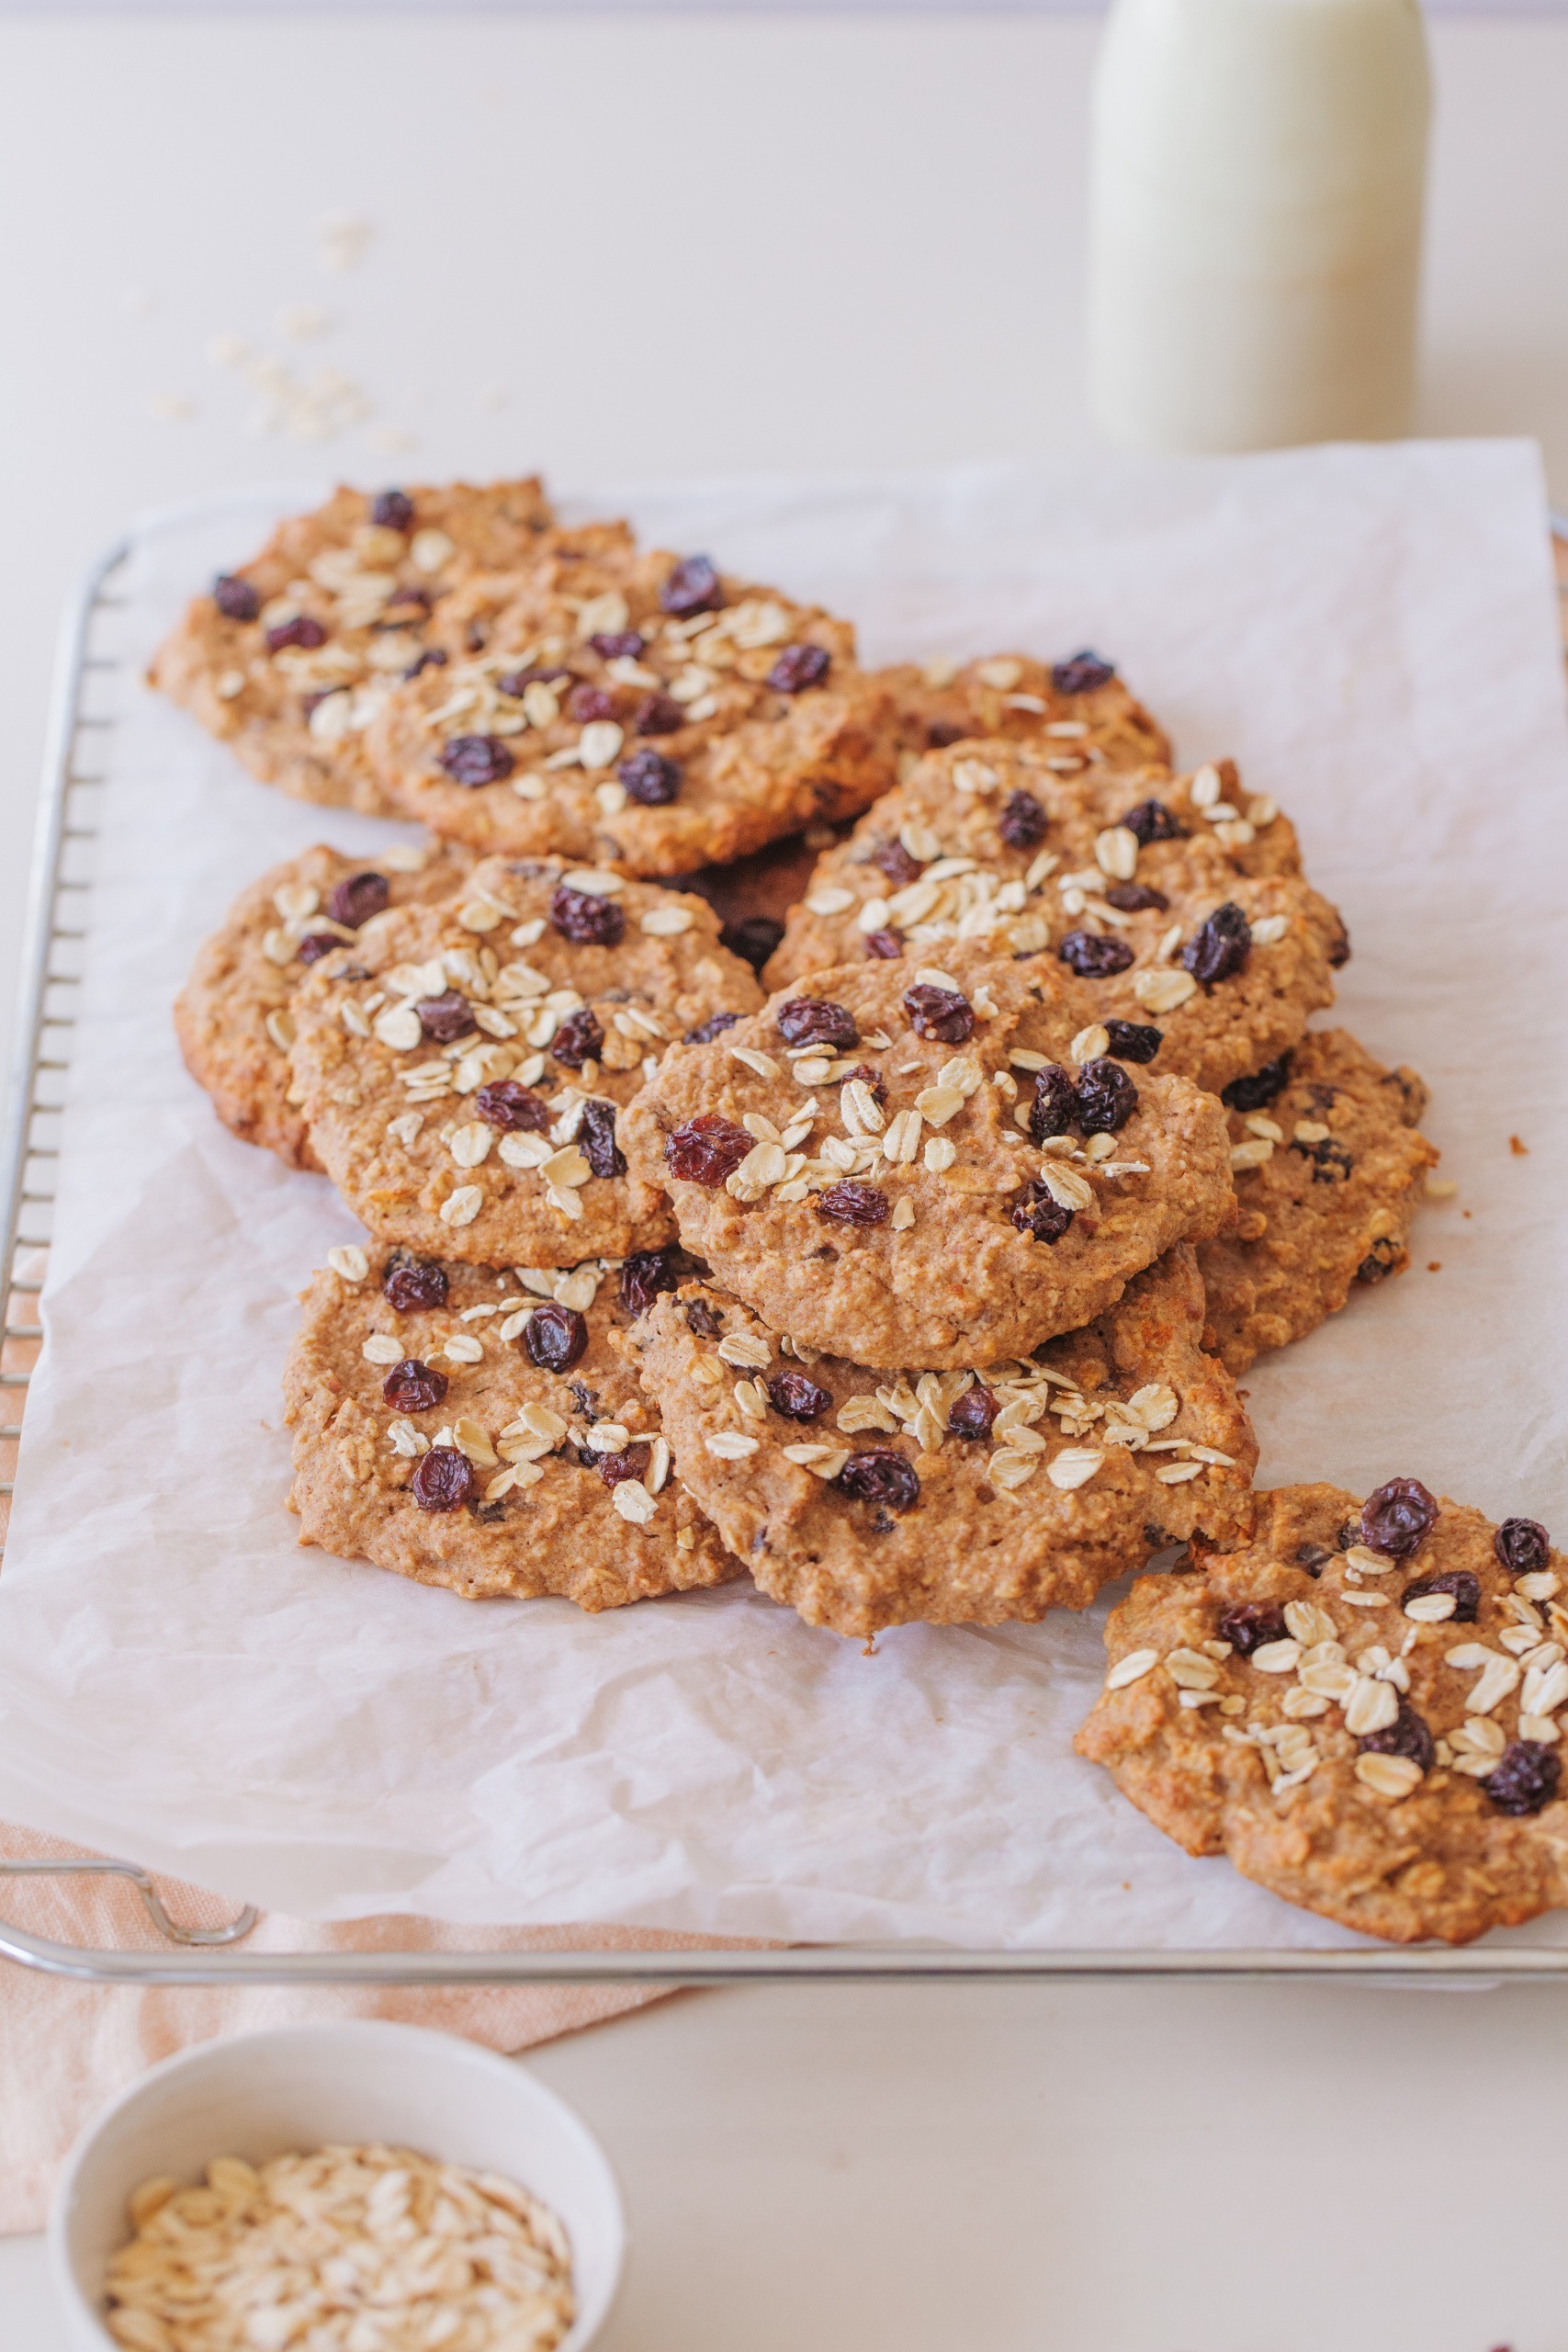 Oat and Raisin Cookies on baking tray with white paper and bowl of oats